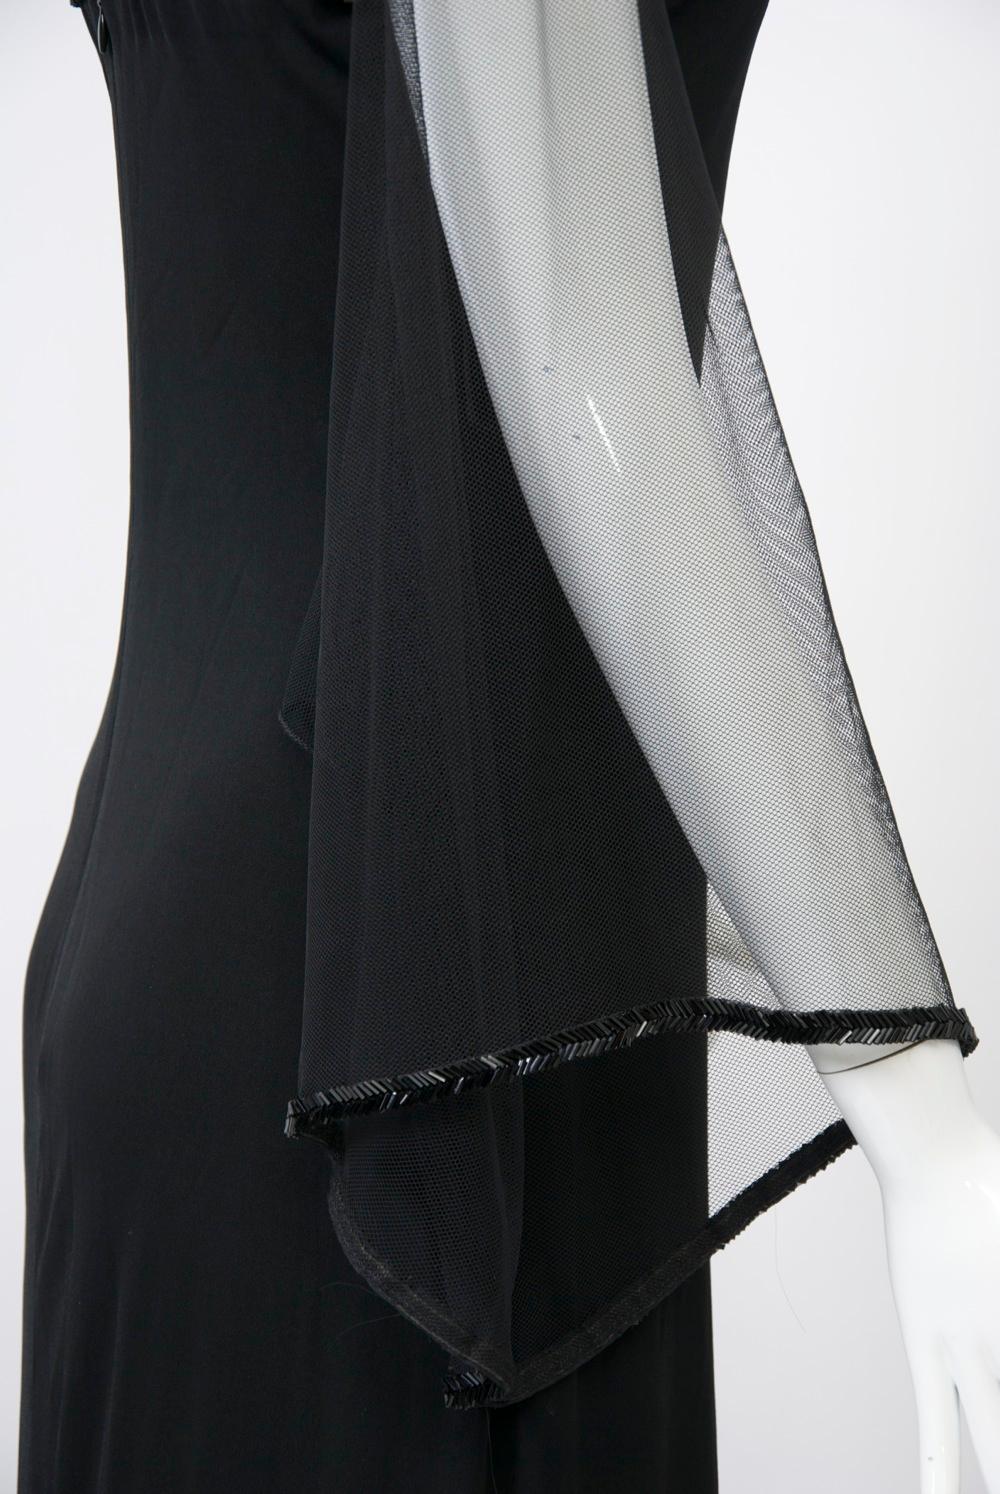 Women's Holly Harp Black Gown with Net Top